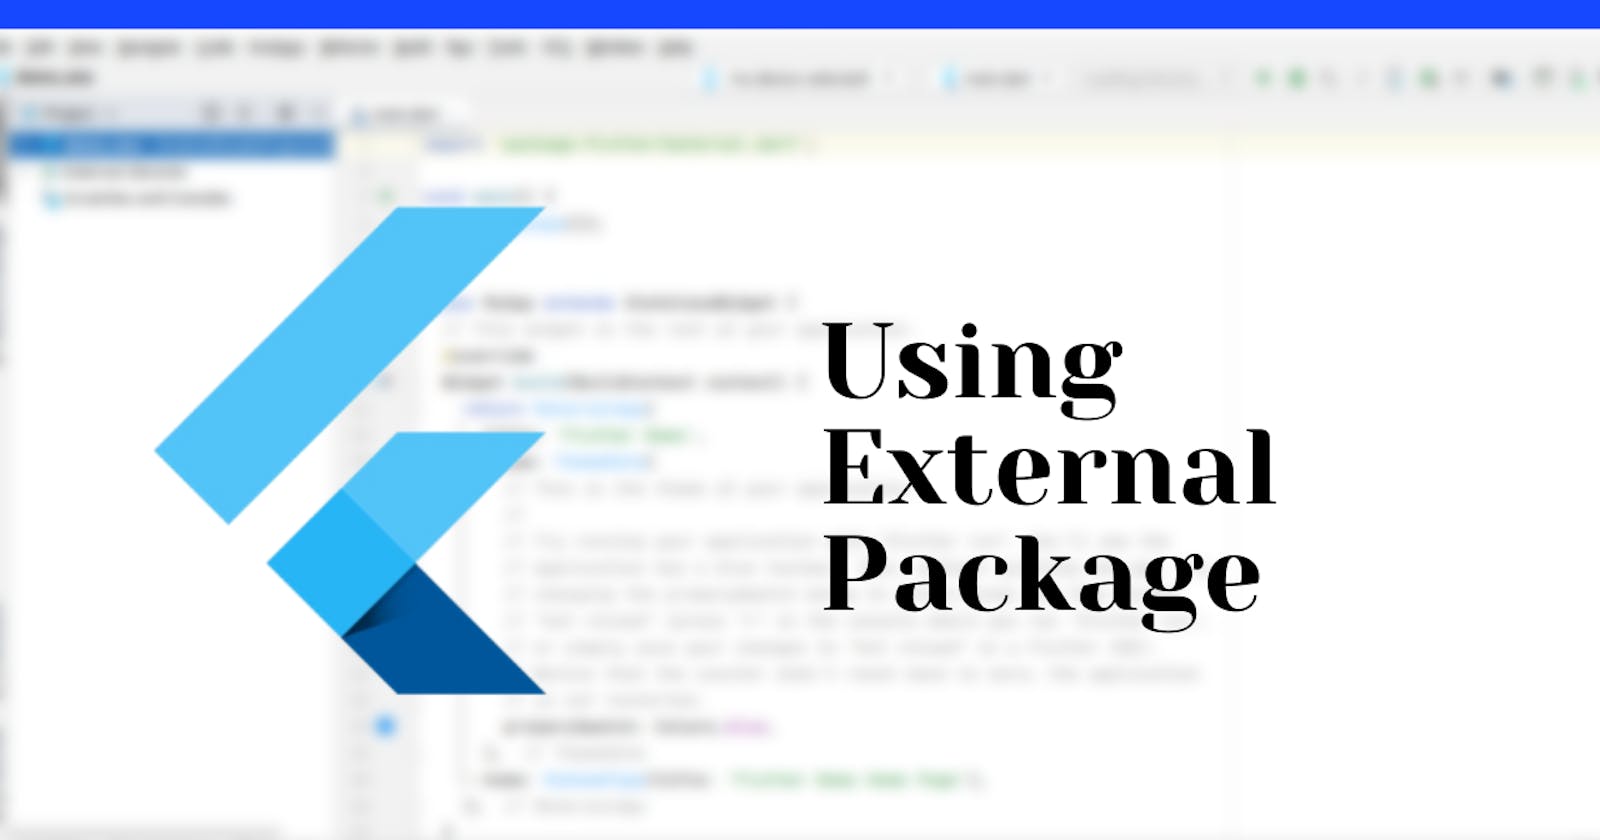 How to use external packages in Flutter